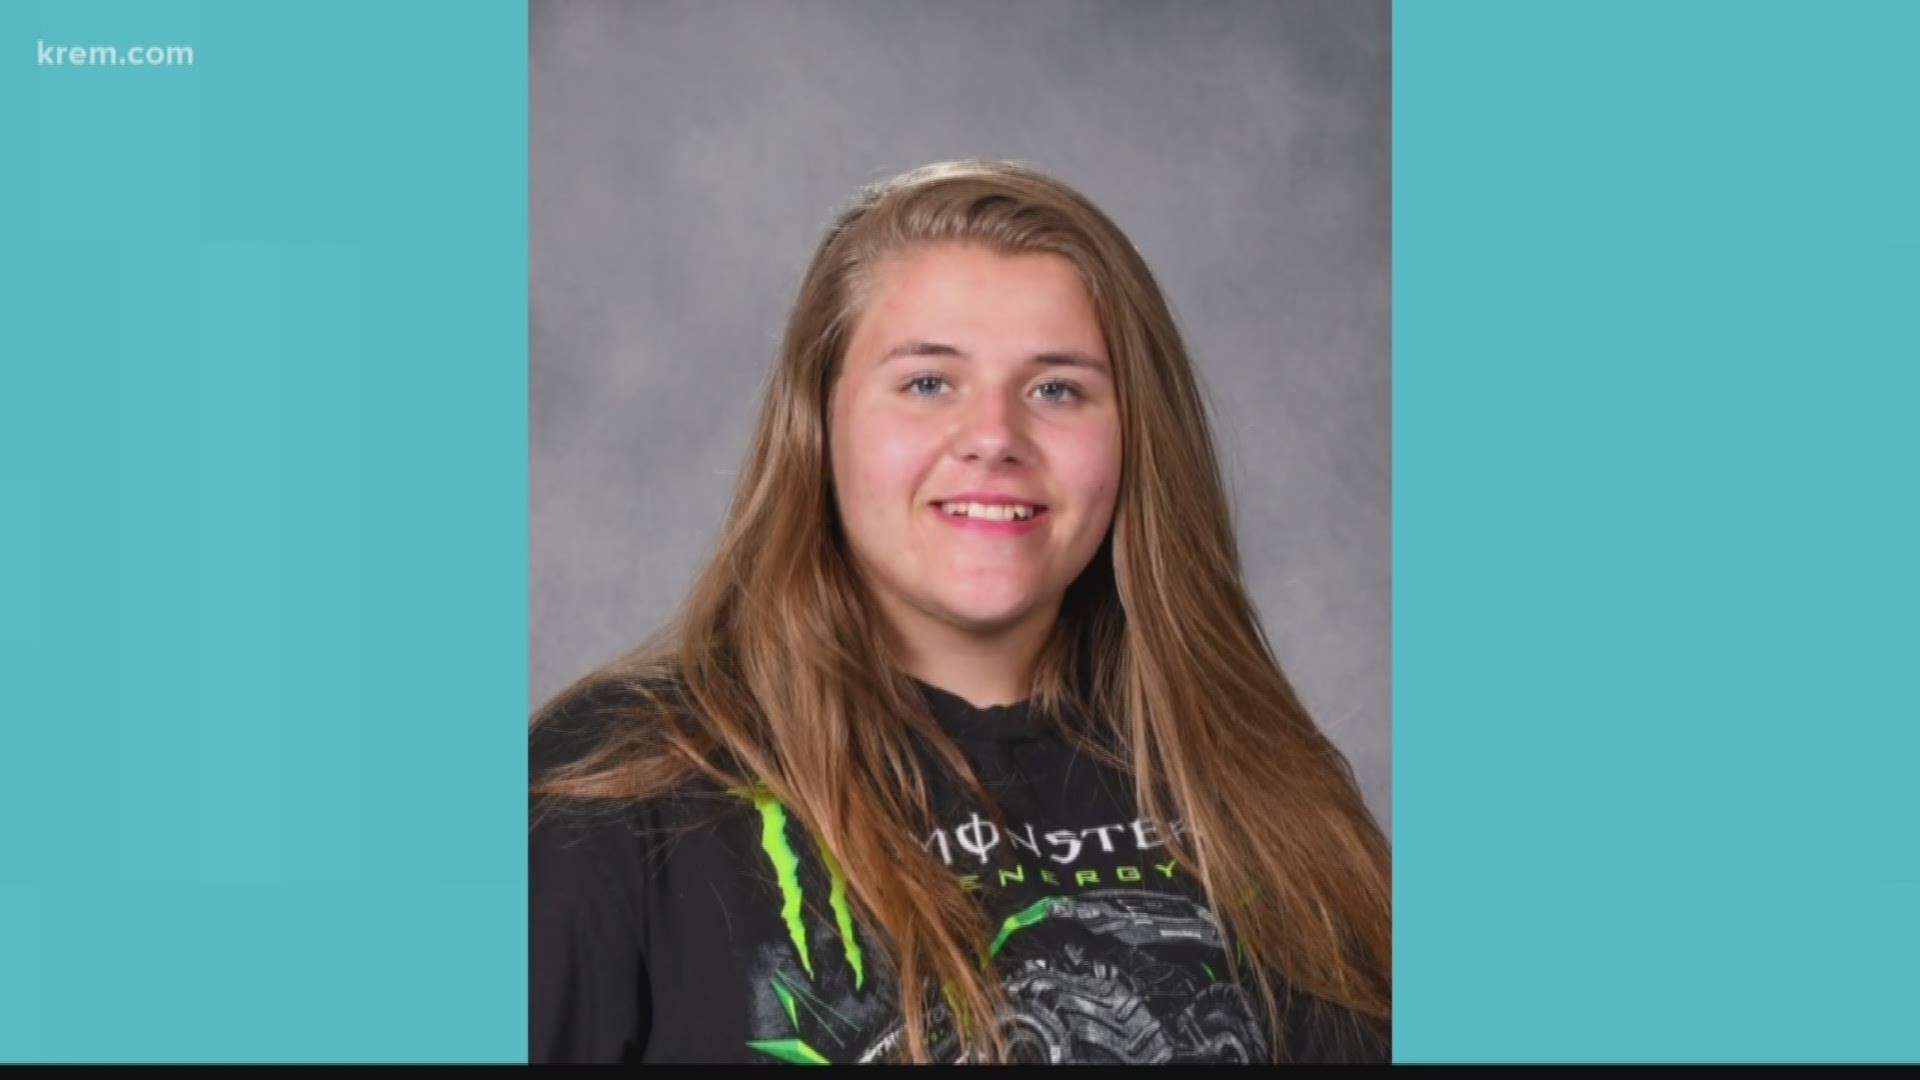 The Kootenai County Sheriff's Office said 15-year-old Lacey Jefferies was found in the early morning hours of Oct. 22.